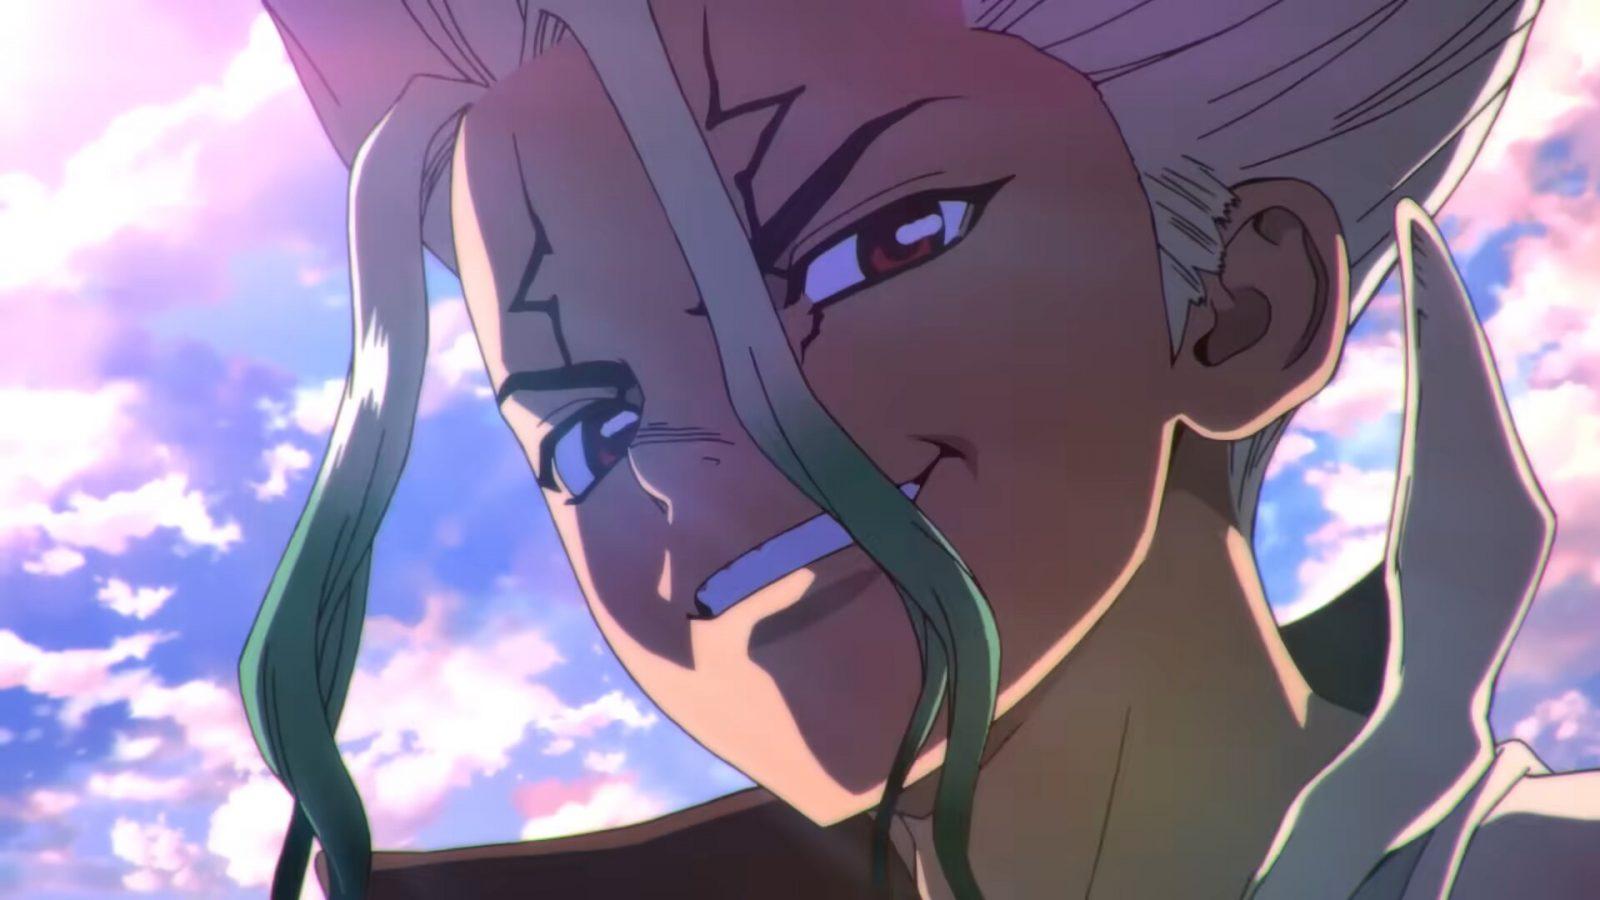 Dr Stone Season 3 Release Date, Time, And Where To Watch